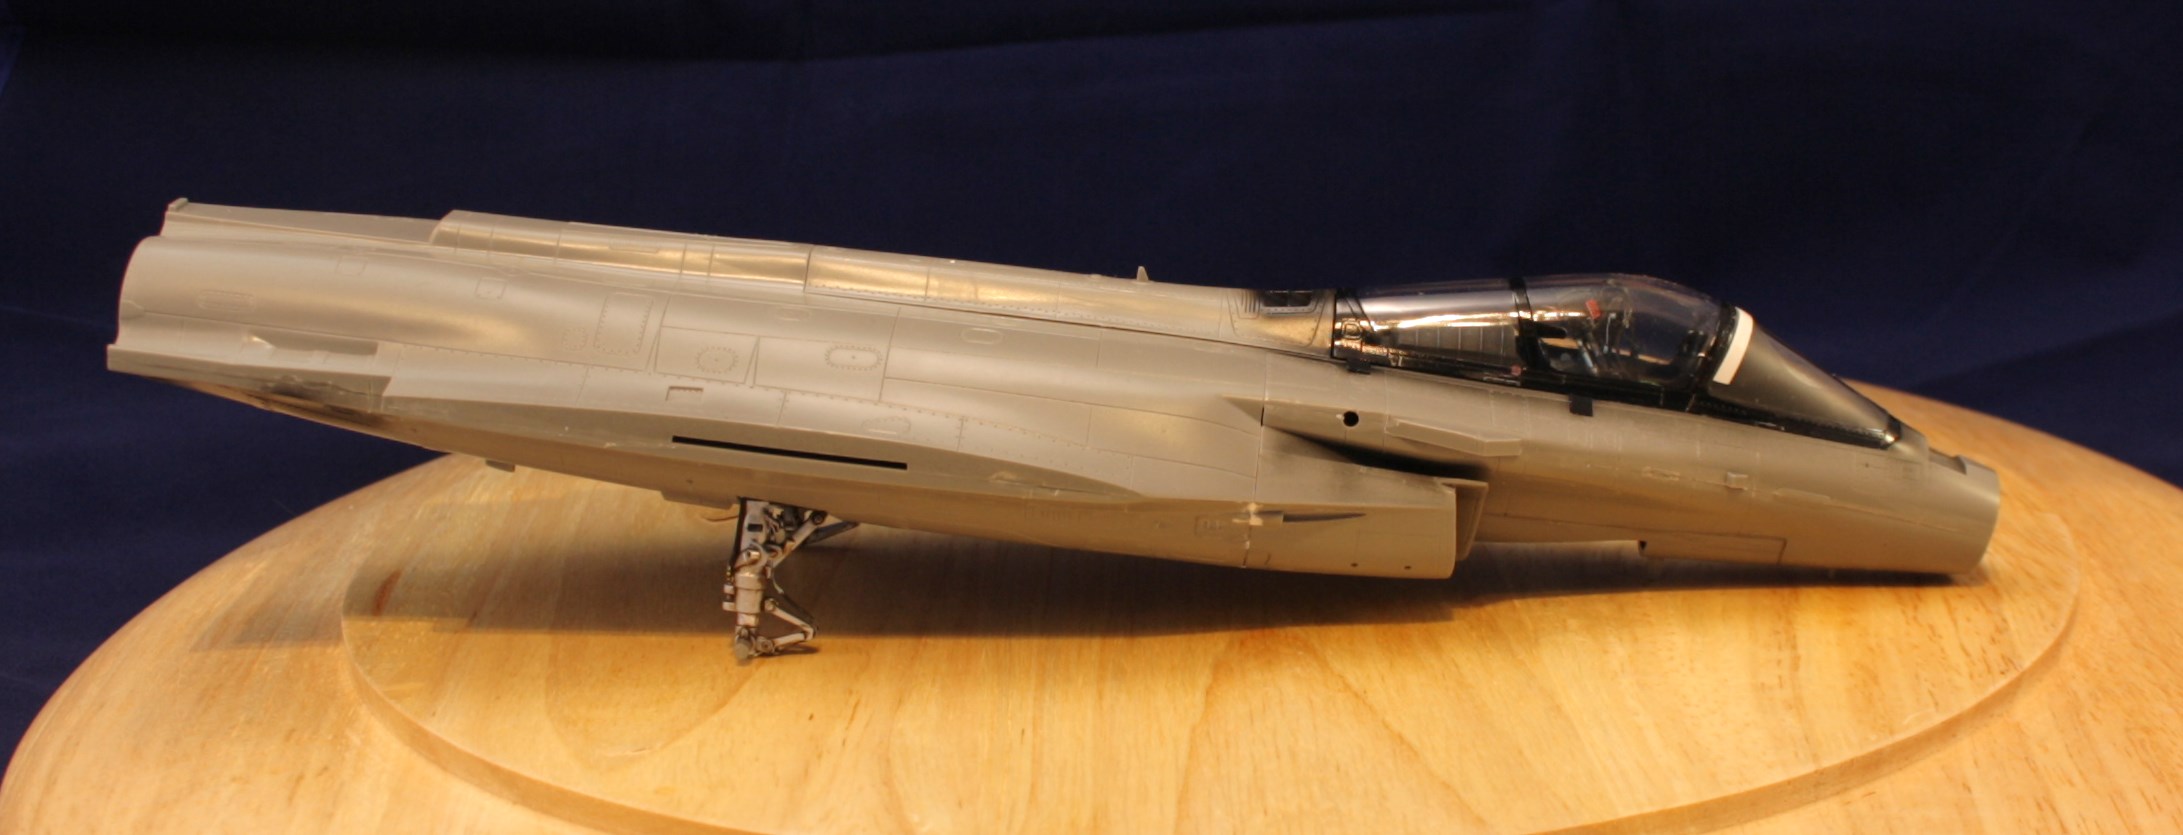 Rafale M  Revell  1/48 - Page 2 Img_5024